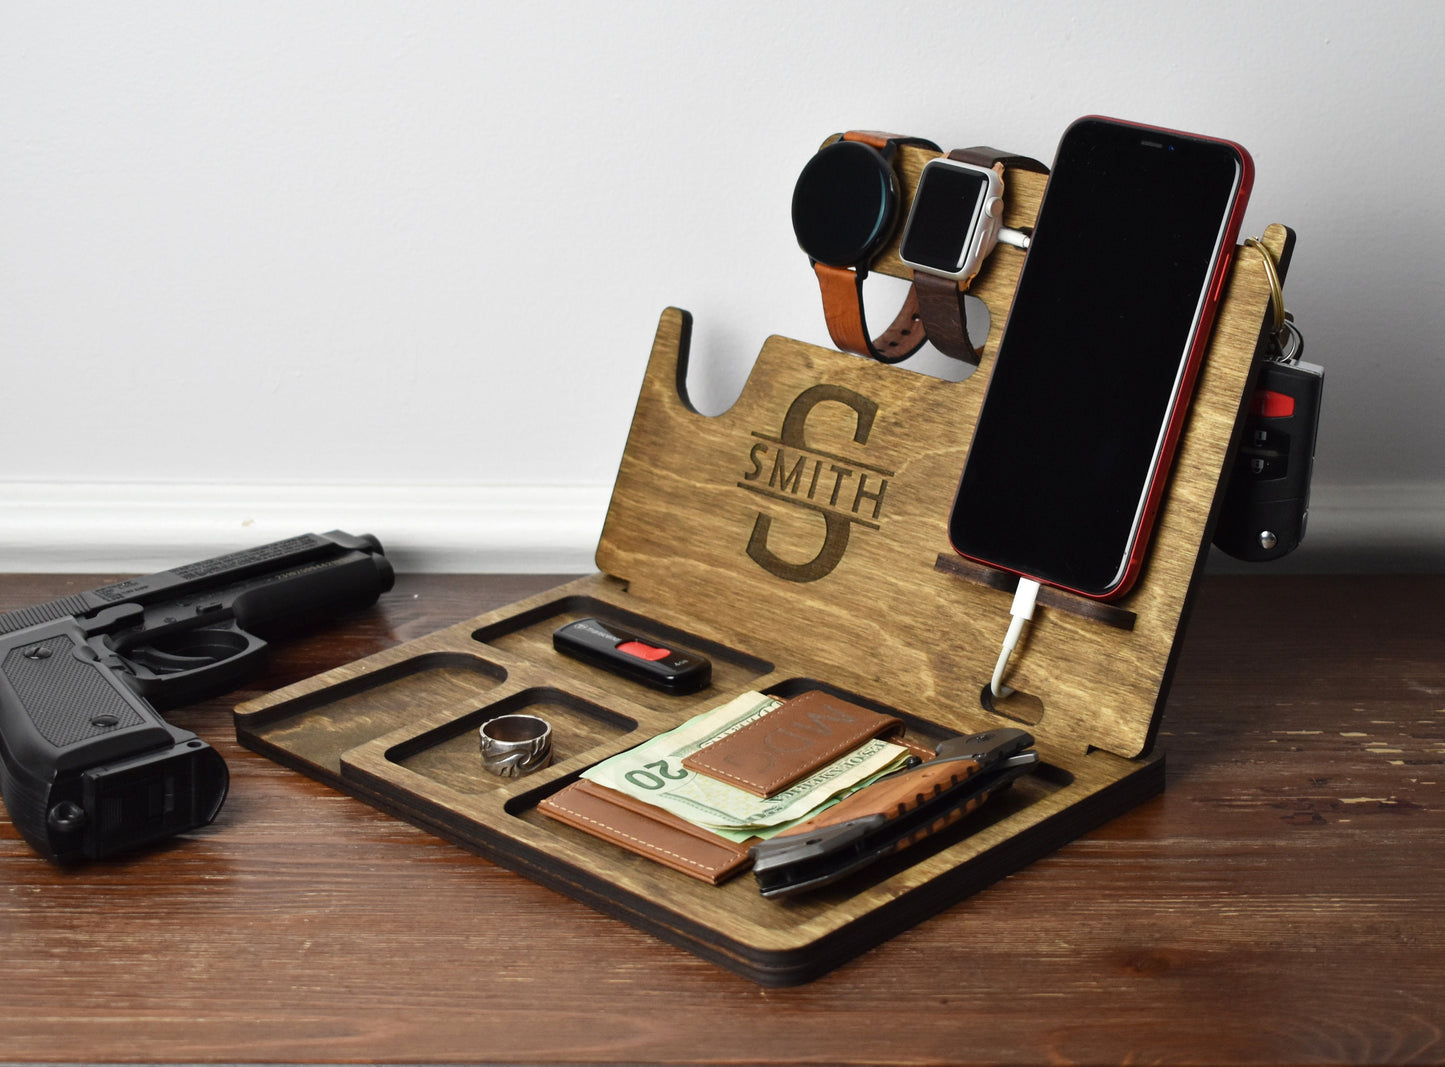 Personalized Phone Charging Station with Gun Holder - GS04